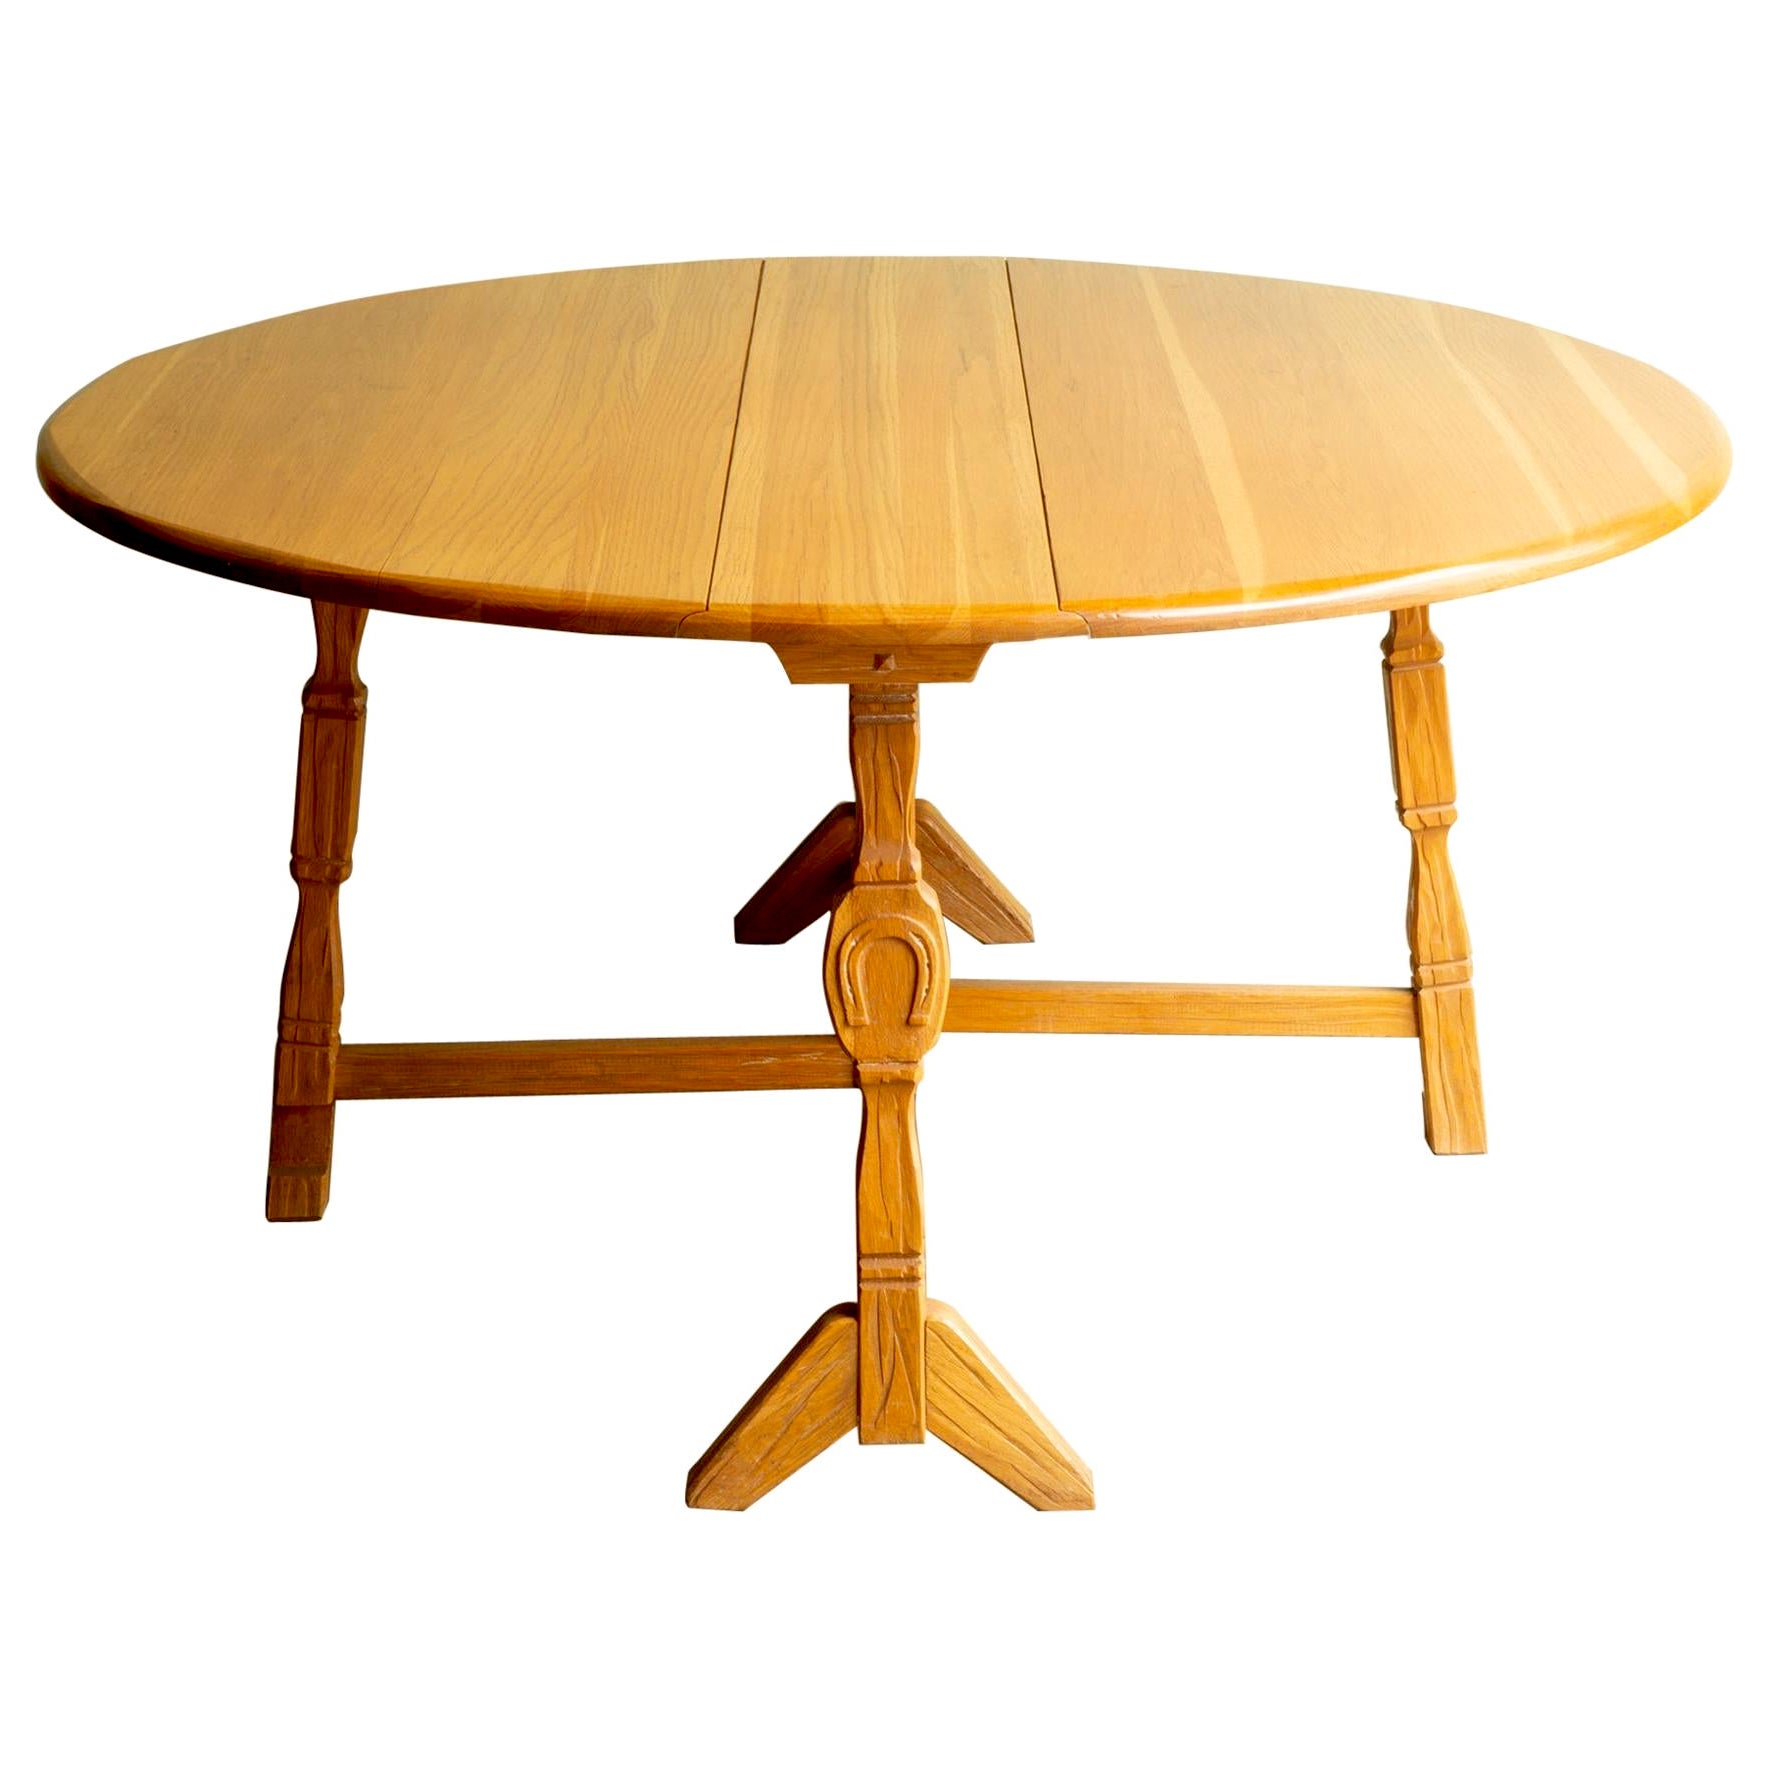 Maison Robert A.Brandt Cerused Oak Ranch Chic Round Dining Table